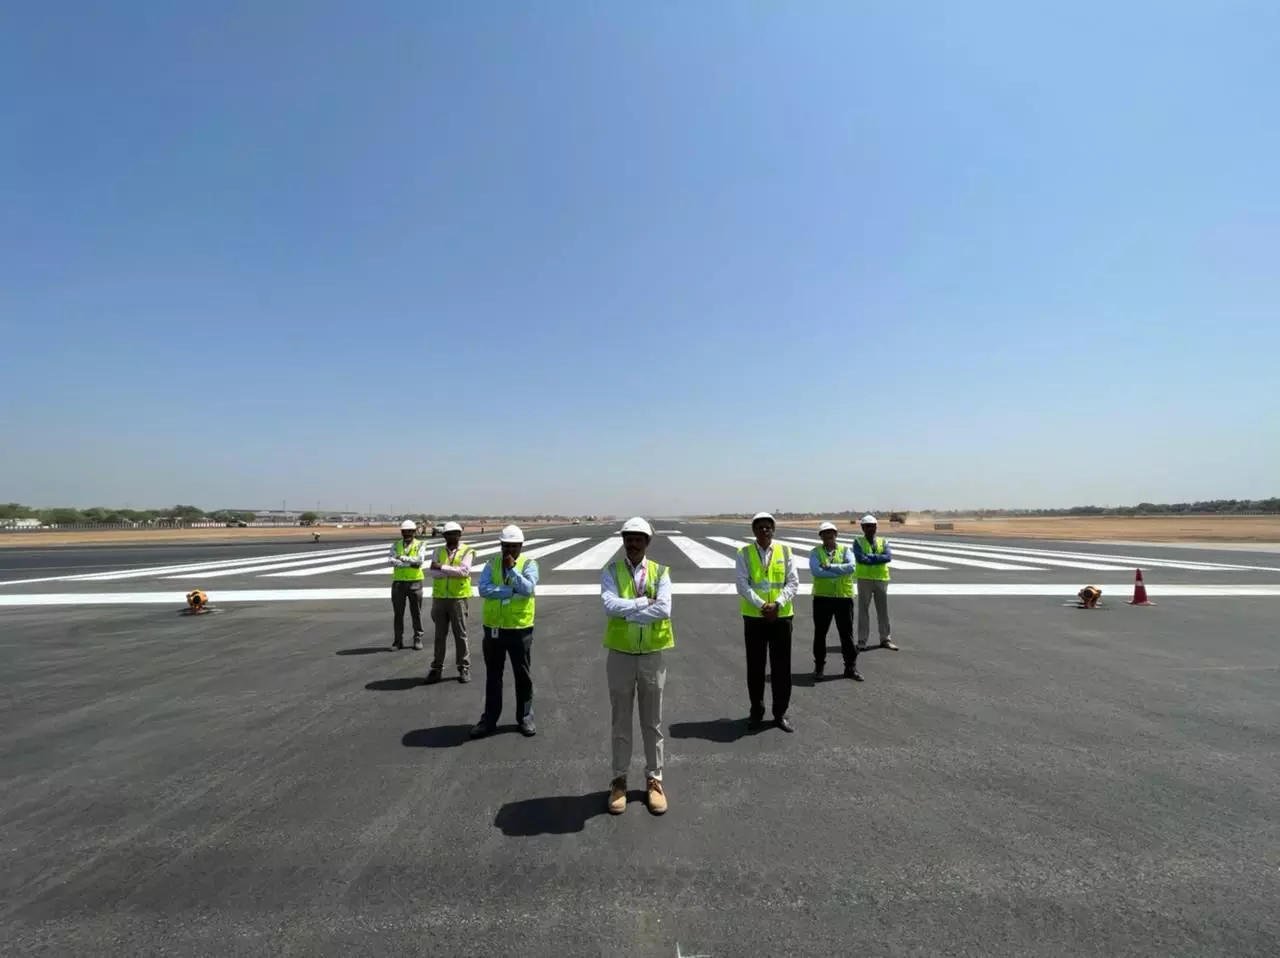 Adani Group Ahmedabad airport redcarpet 3.5 km runway in 75 days claims record